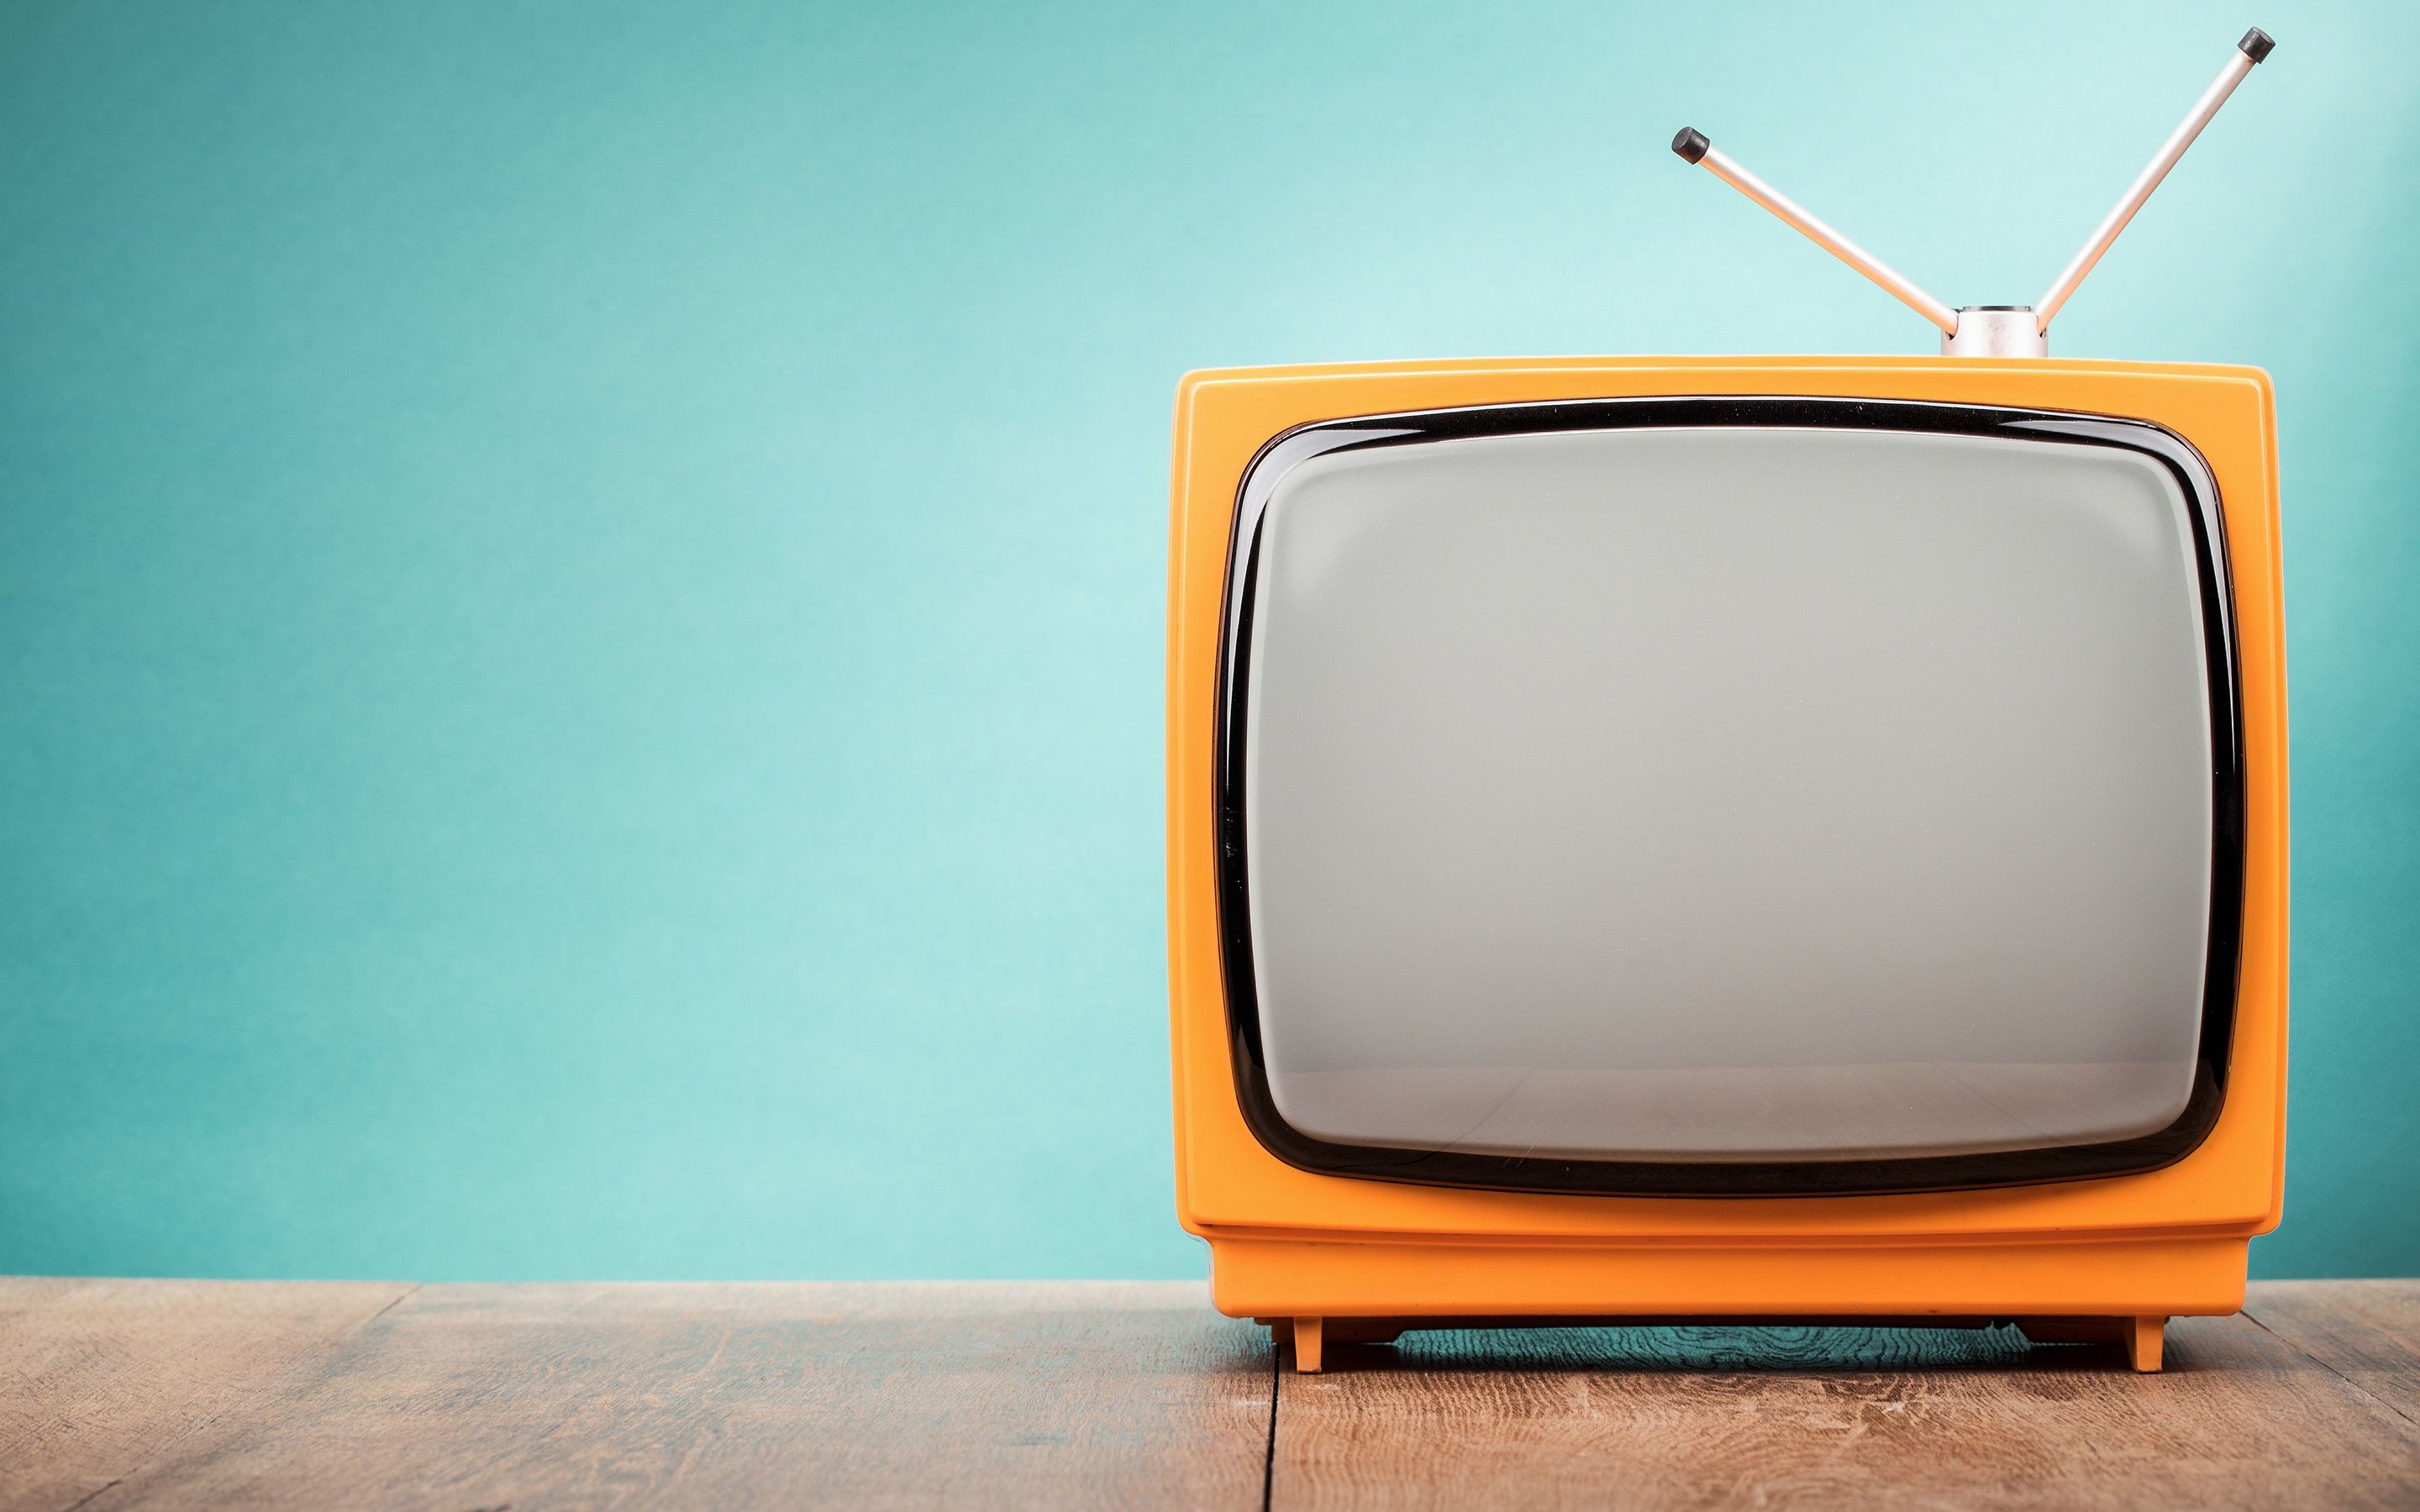 Tv Photos Download The BEST Free Tv Stock Photos  HD Images